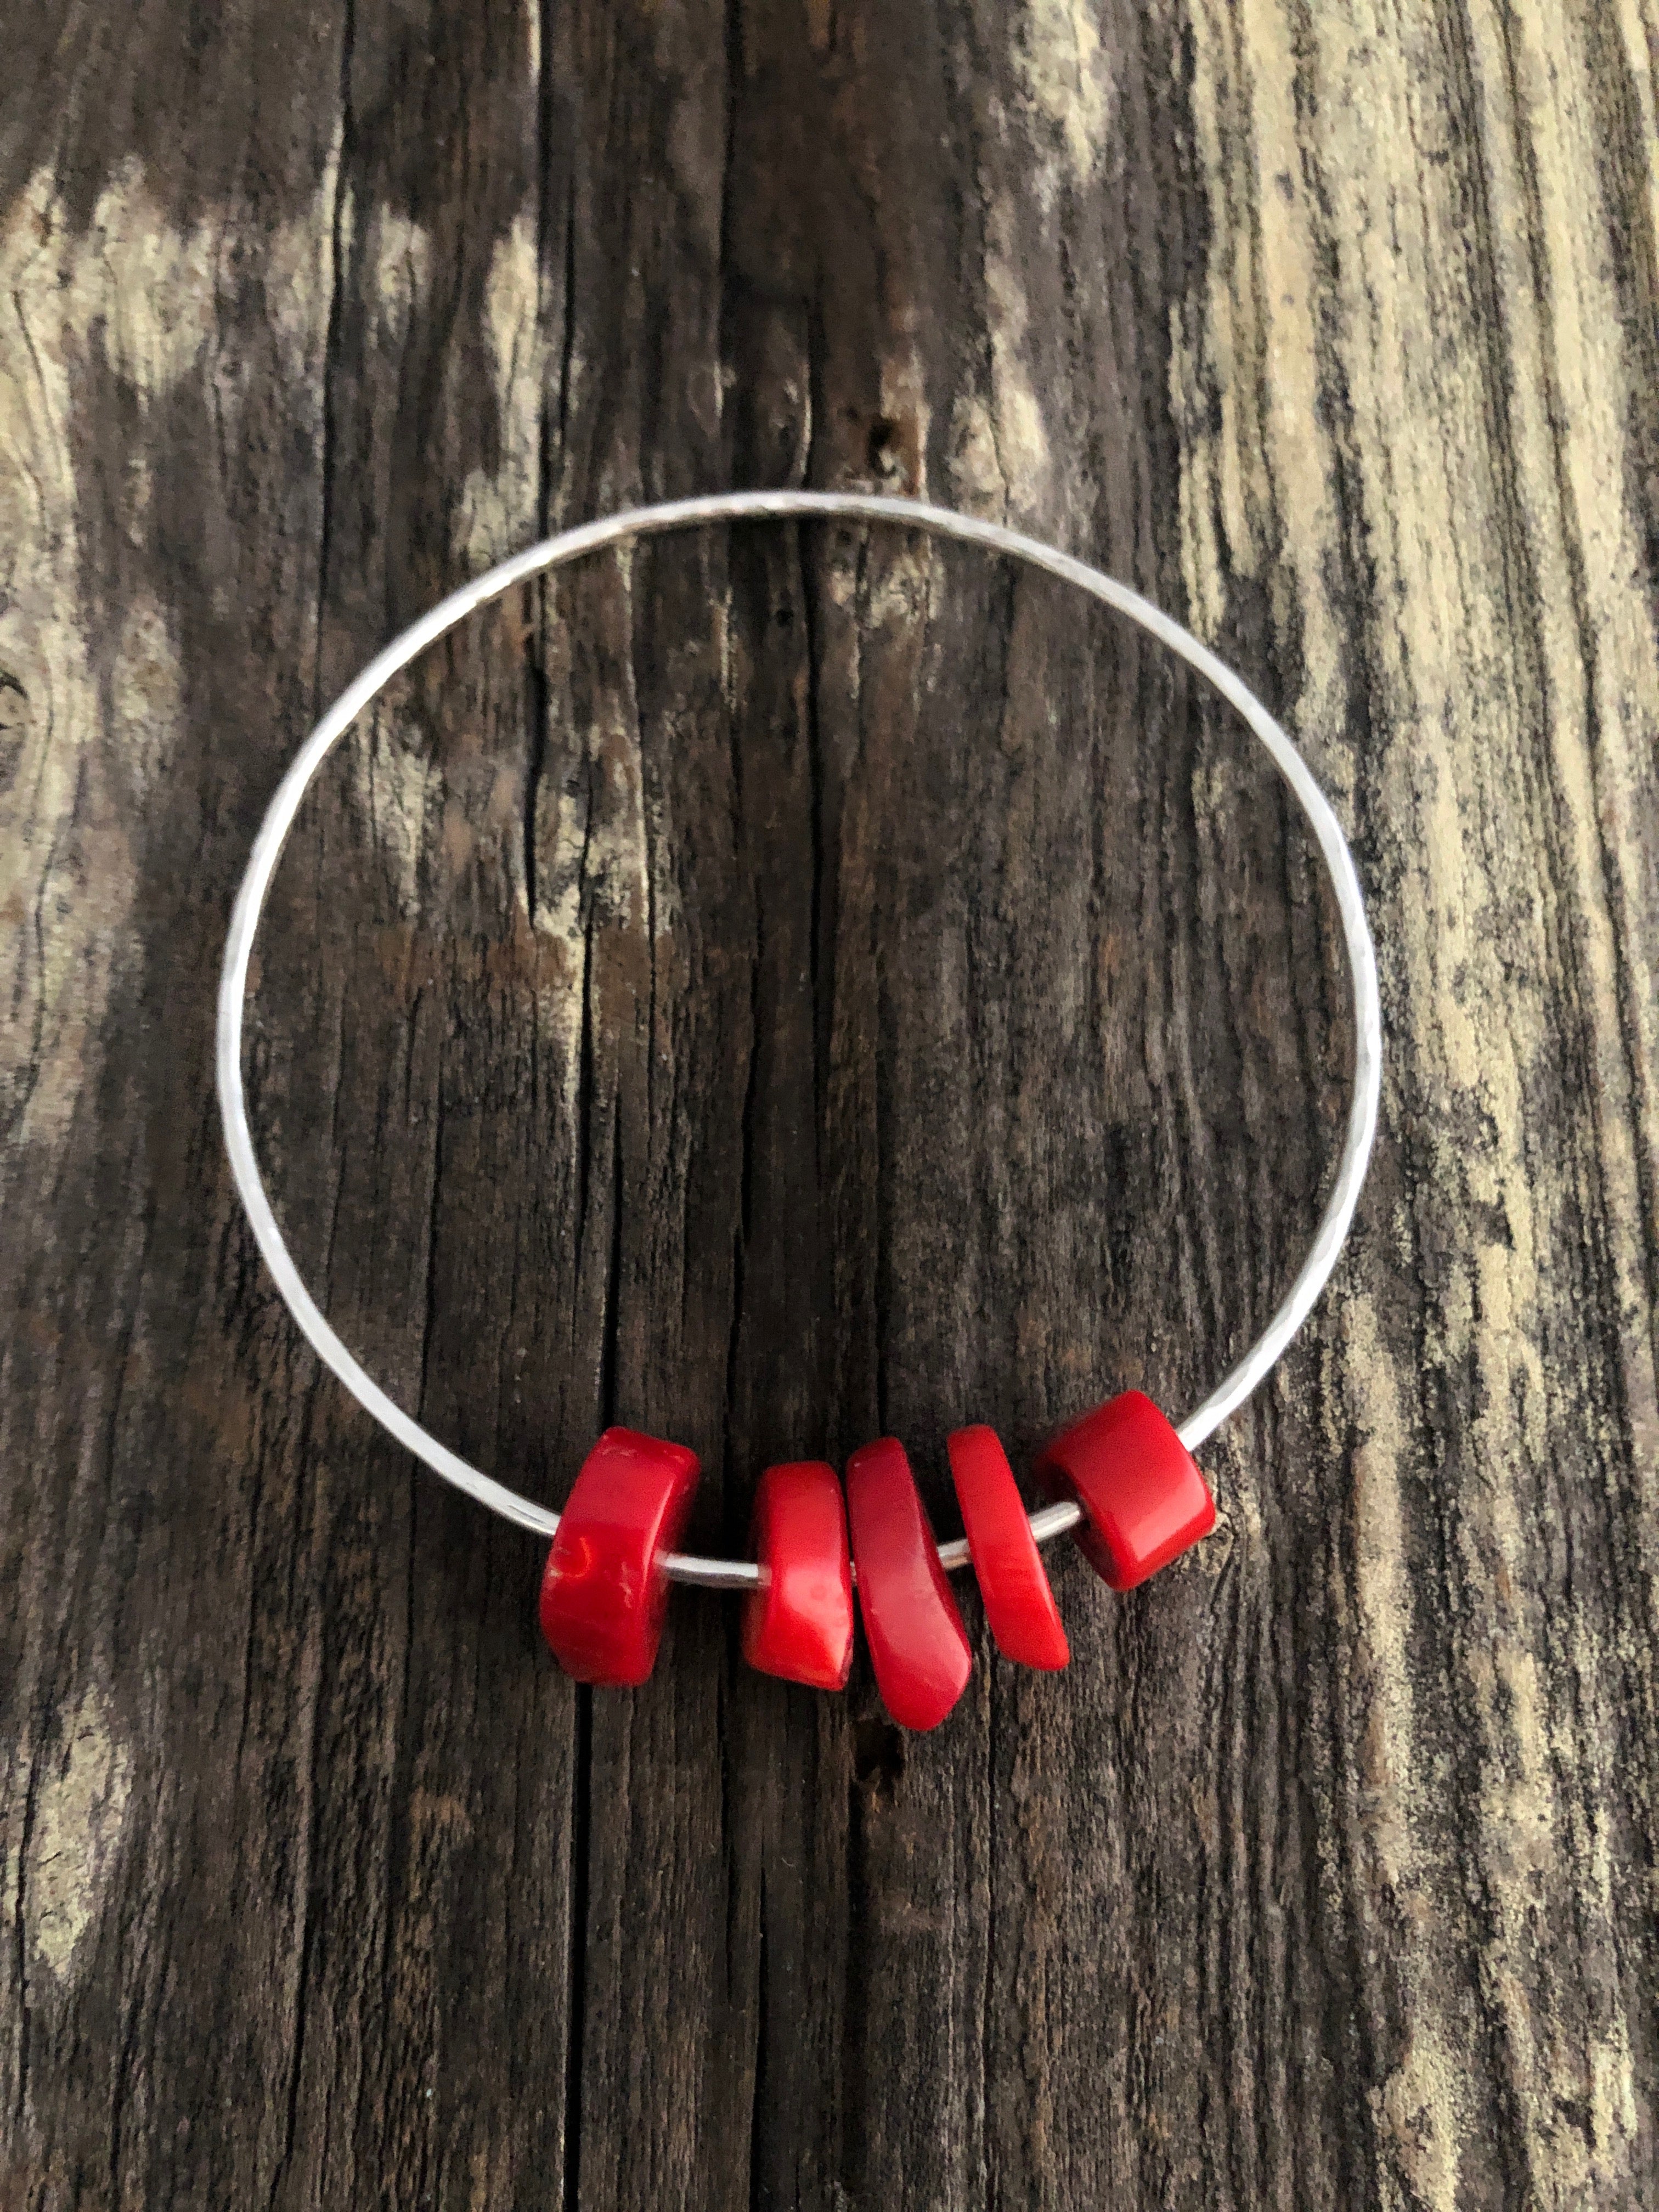 5 pieces of coral on a silver bangle on a wooden background